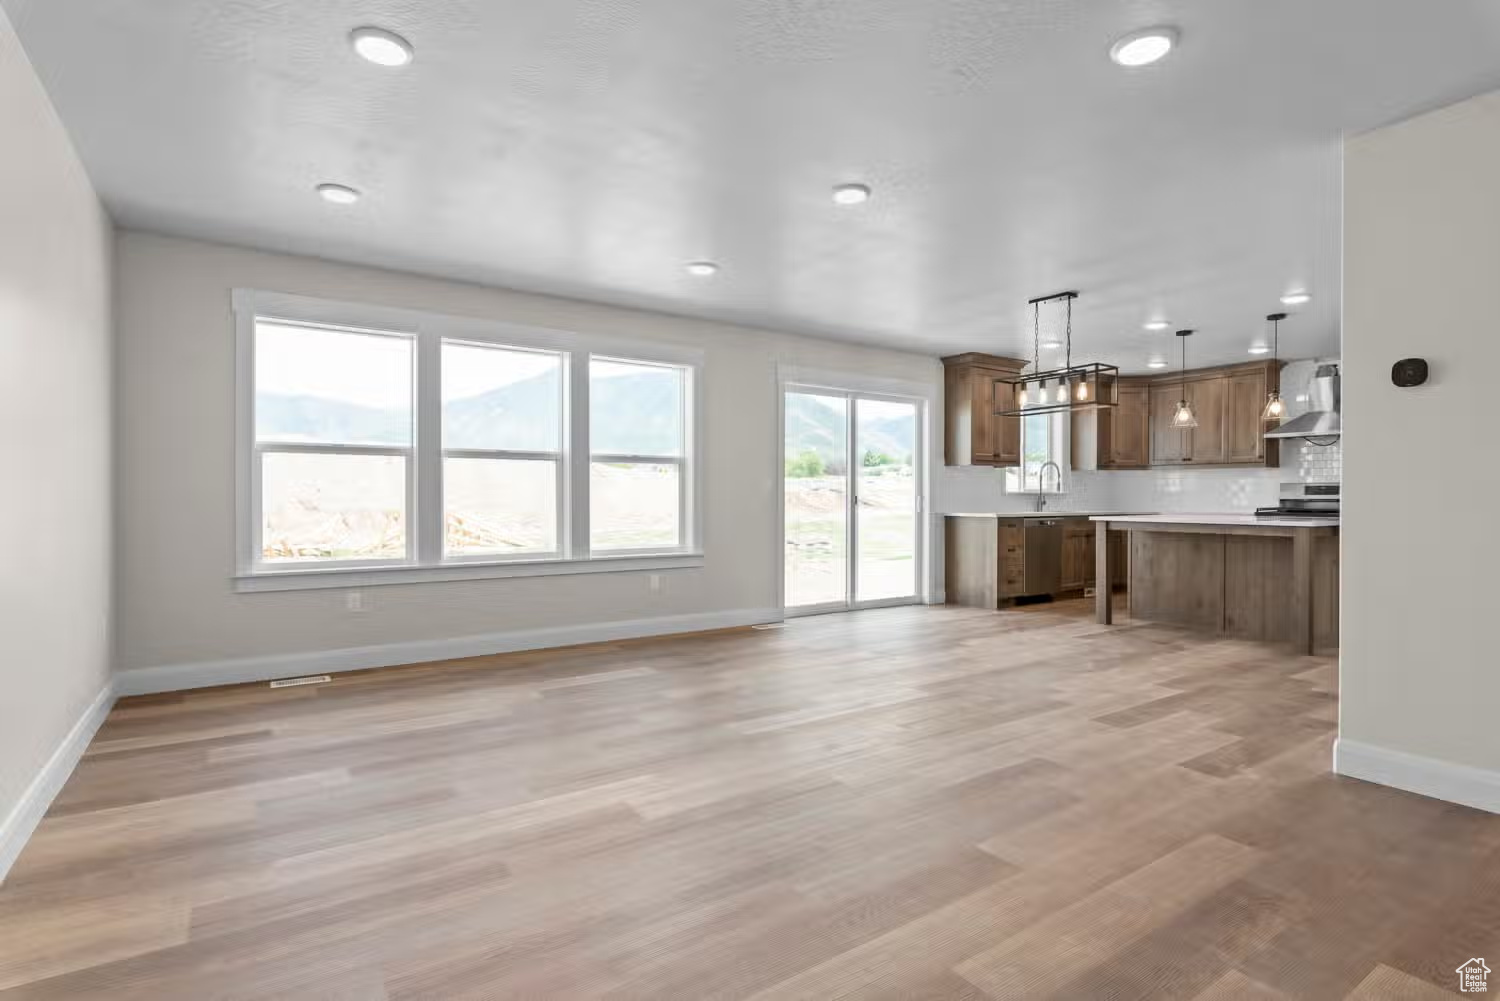 Unfurnished living room with plenty of natural light, light hardwood / wood-style floors, and sink